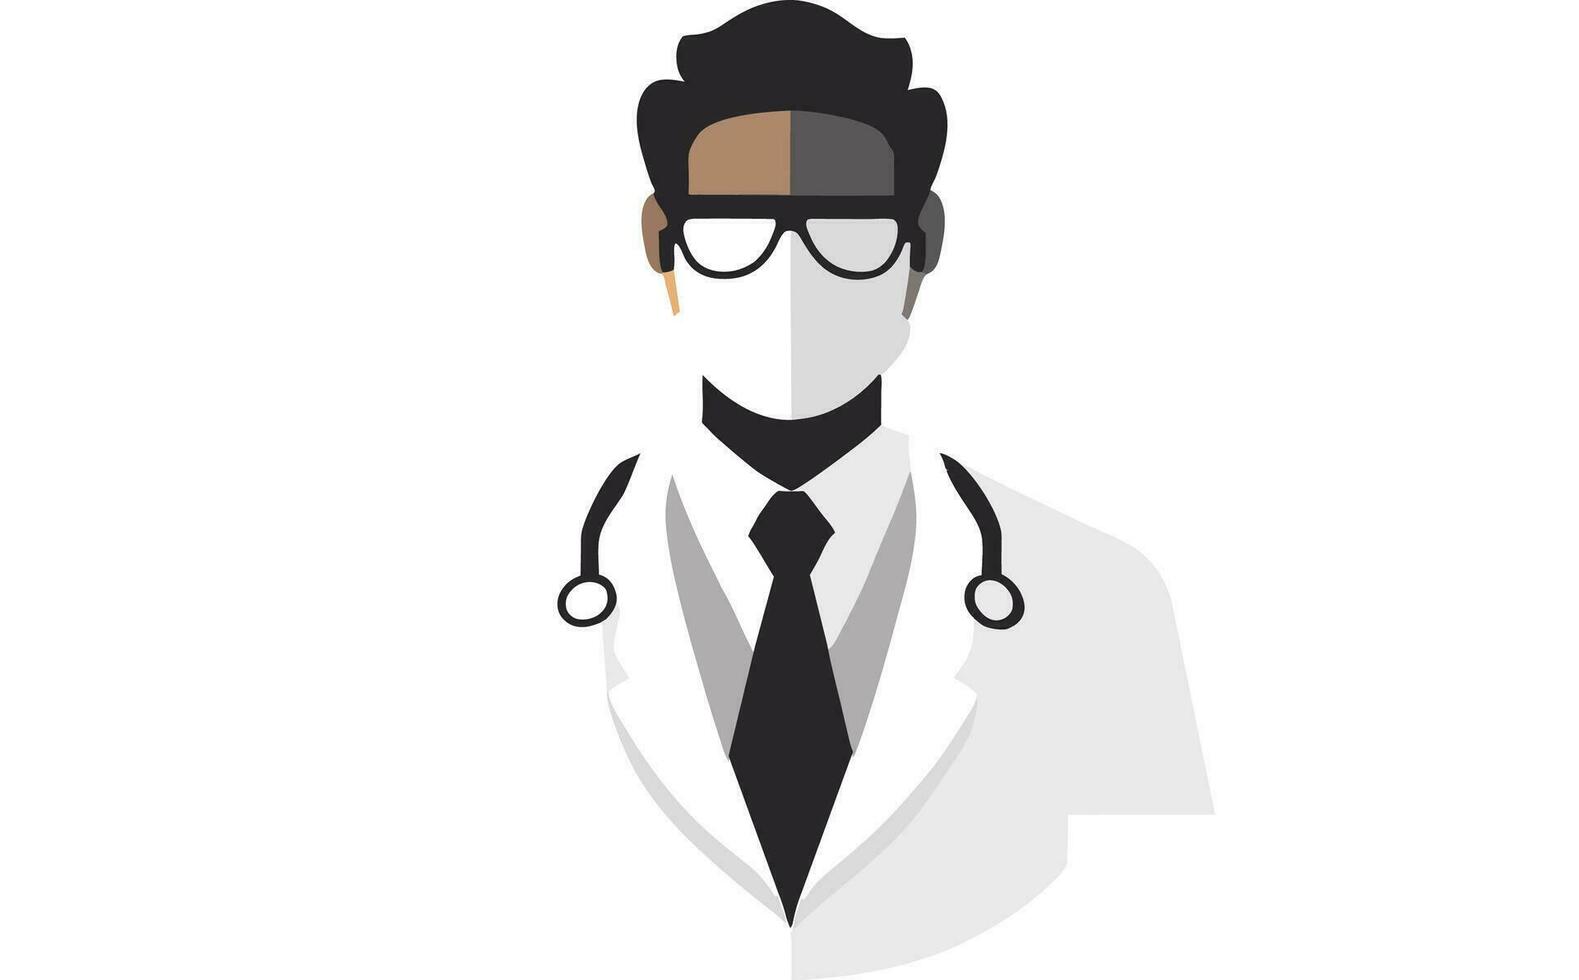 Docter silhouette vector art, Silhouette of man Doctor.